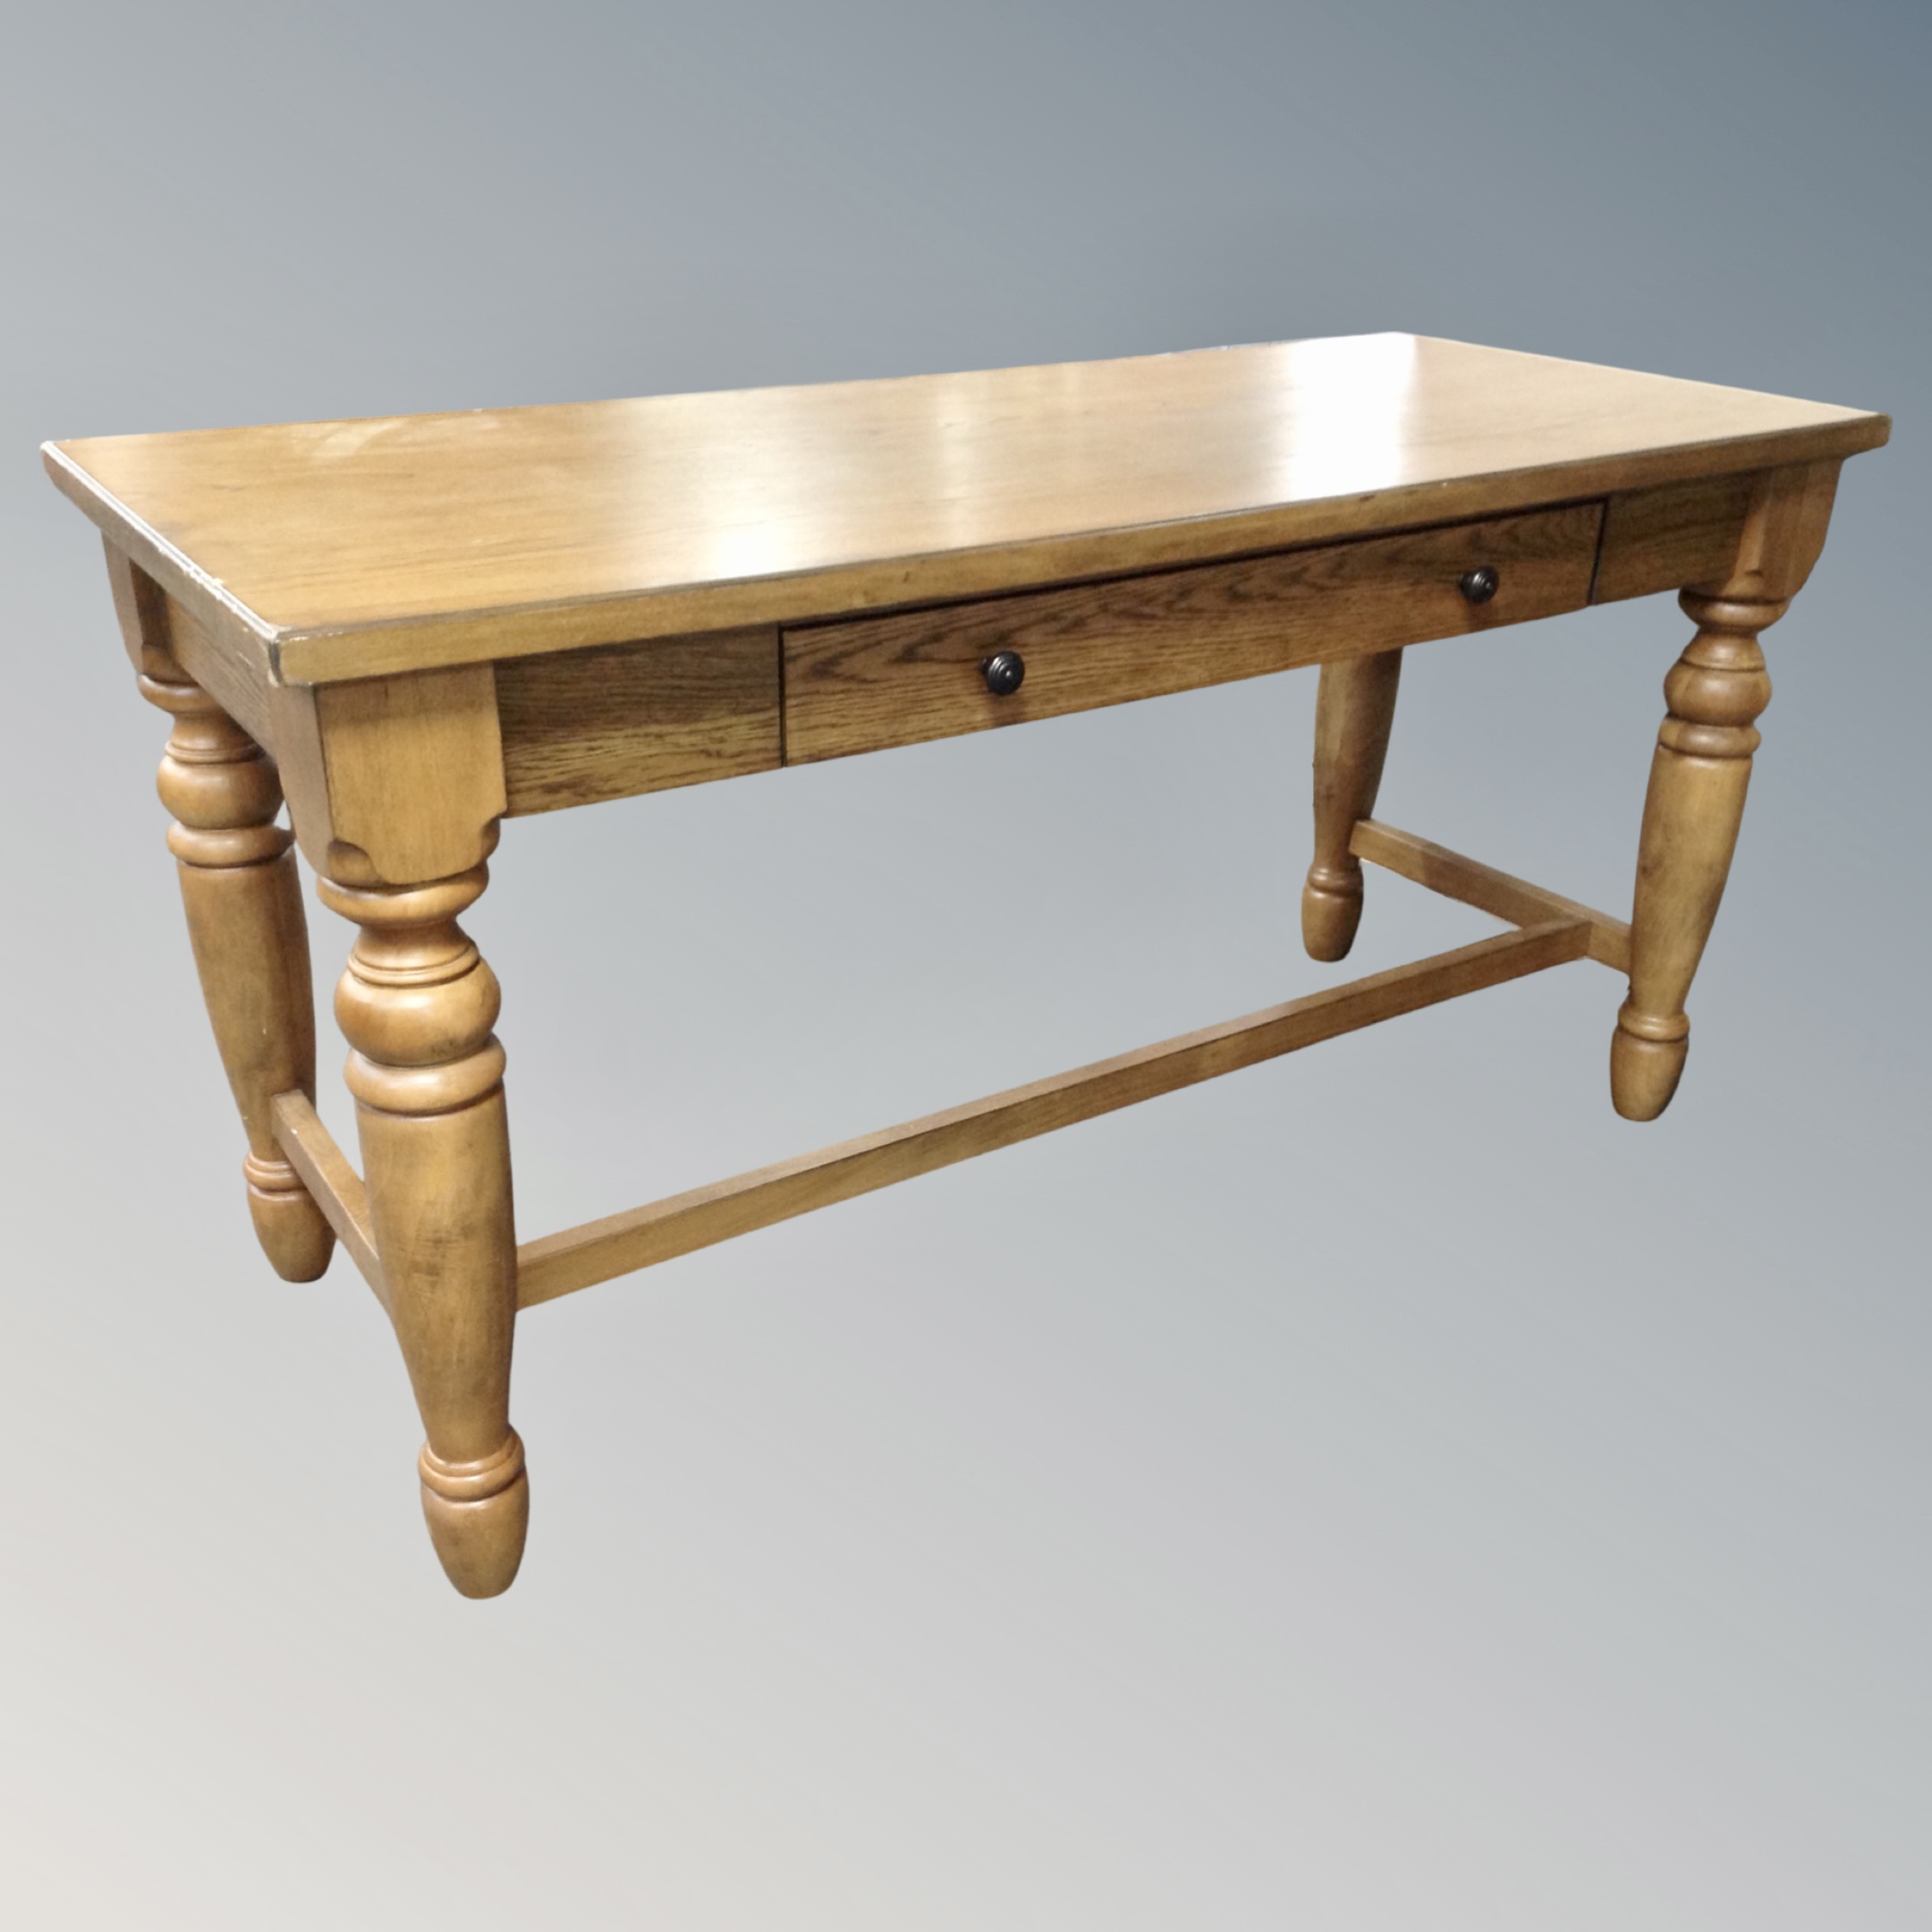 A contemporary refectory office table with pull out drawer slide in oak finish